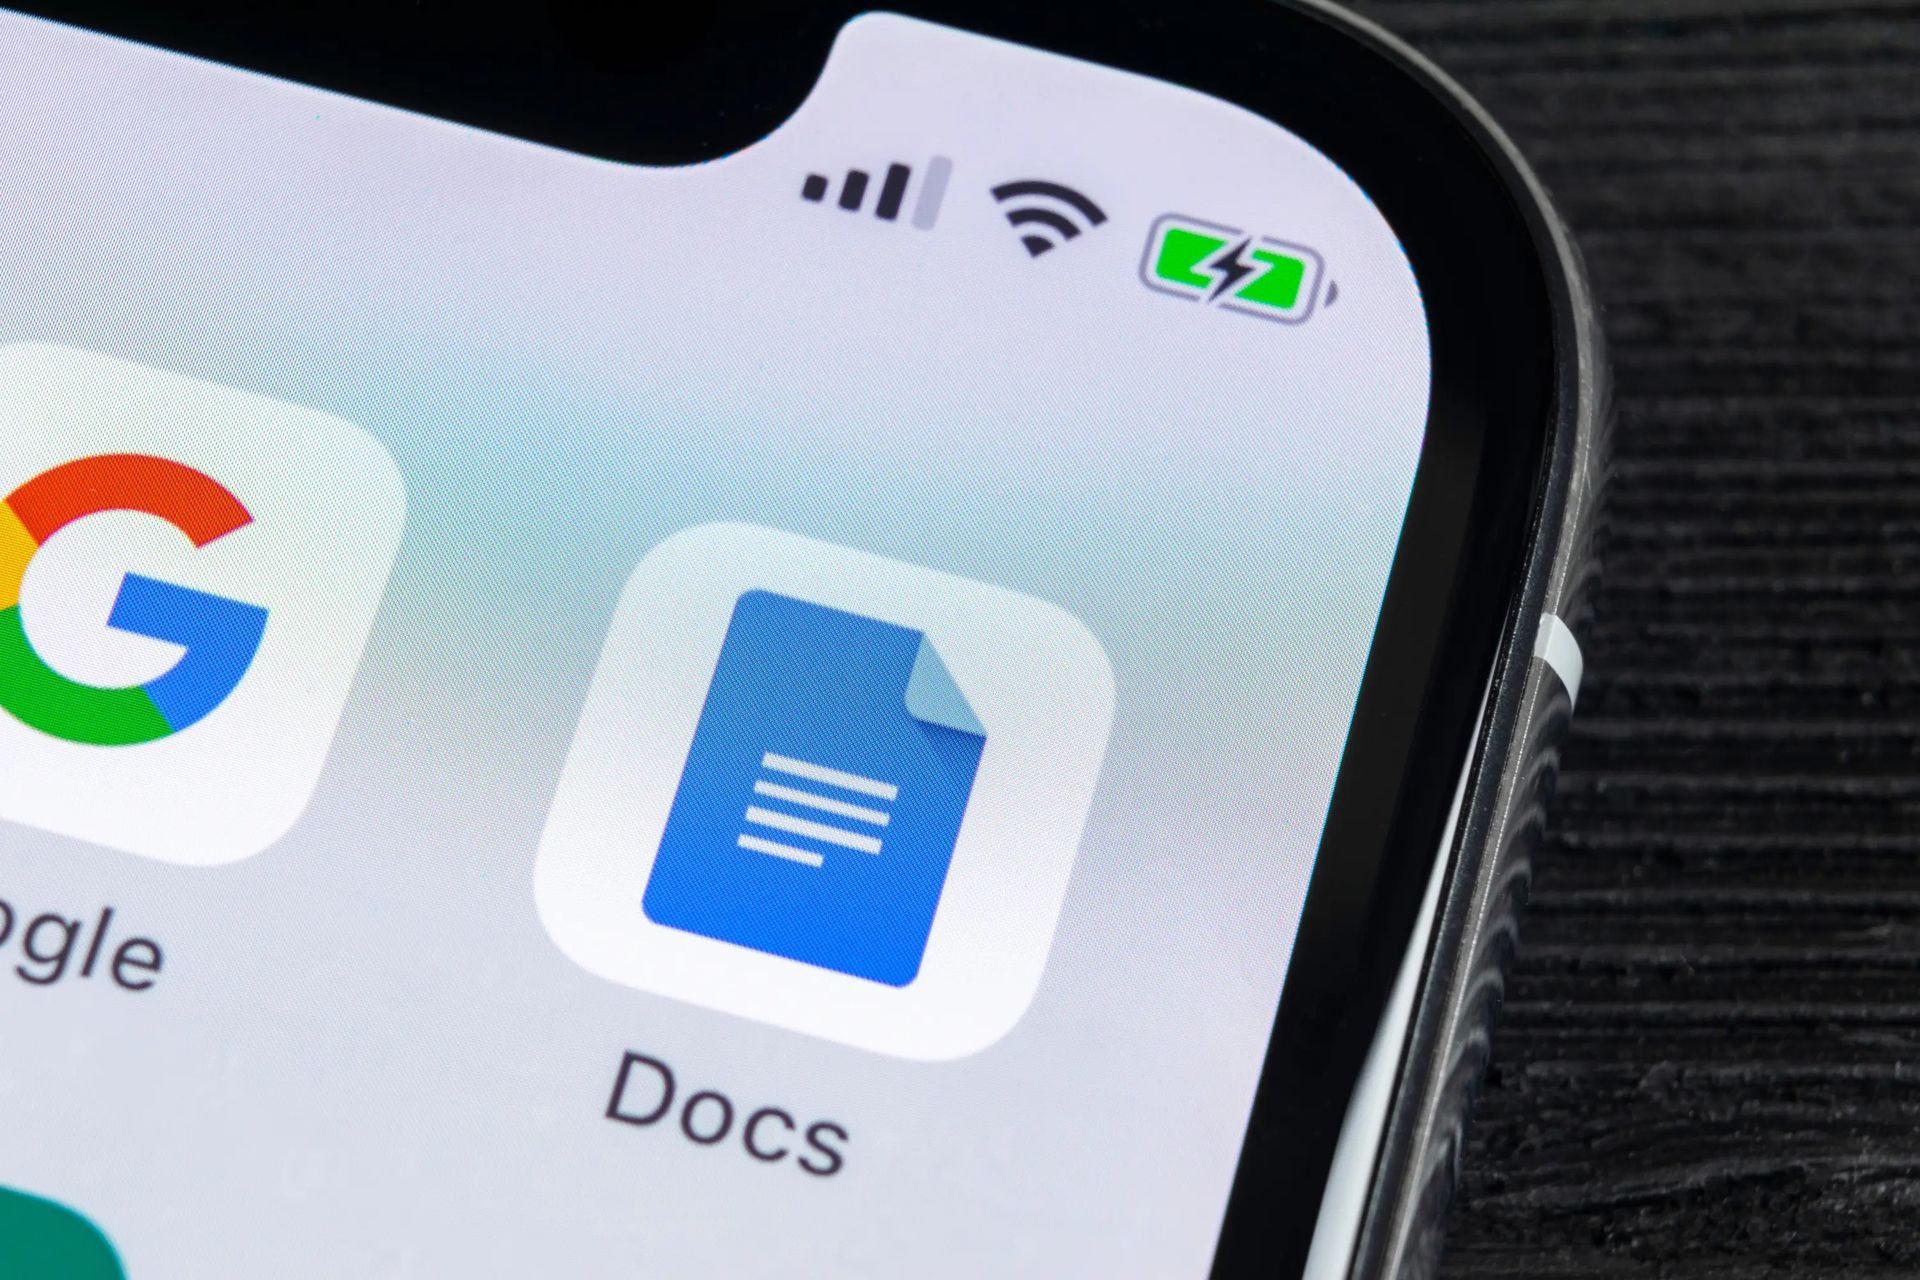 Today we are here to show you how to double space in Google Docs for PC, Android and iOS systems.